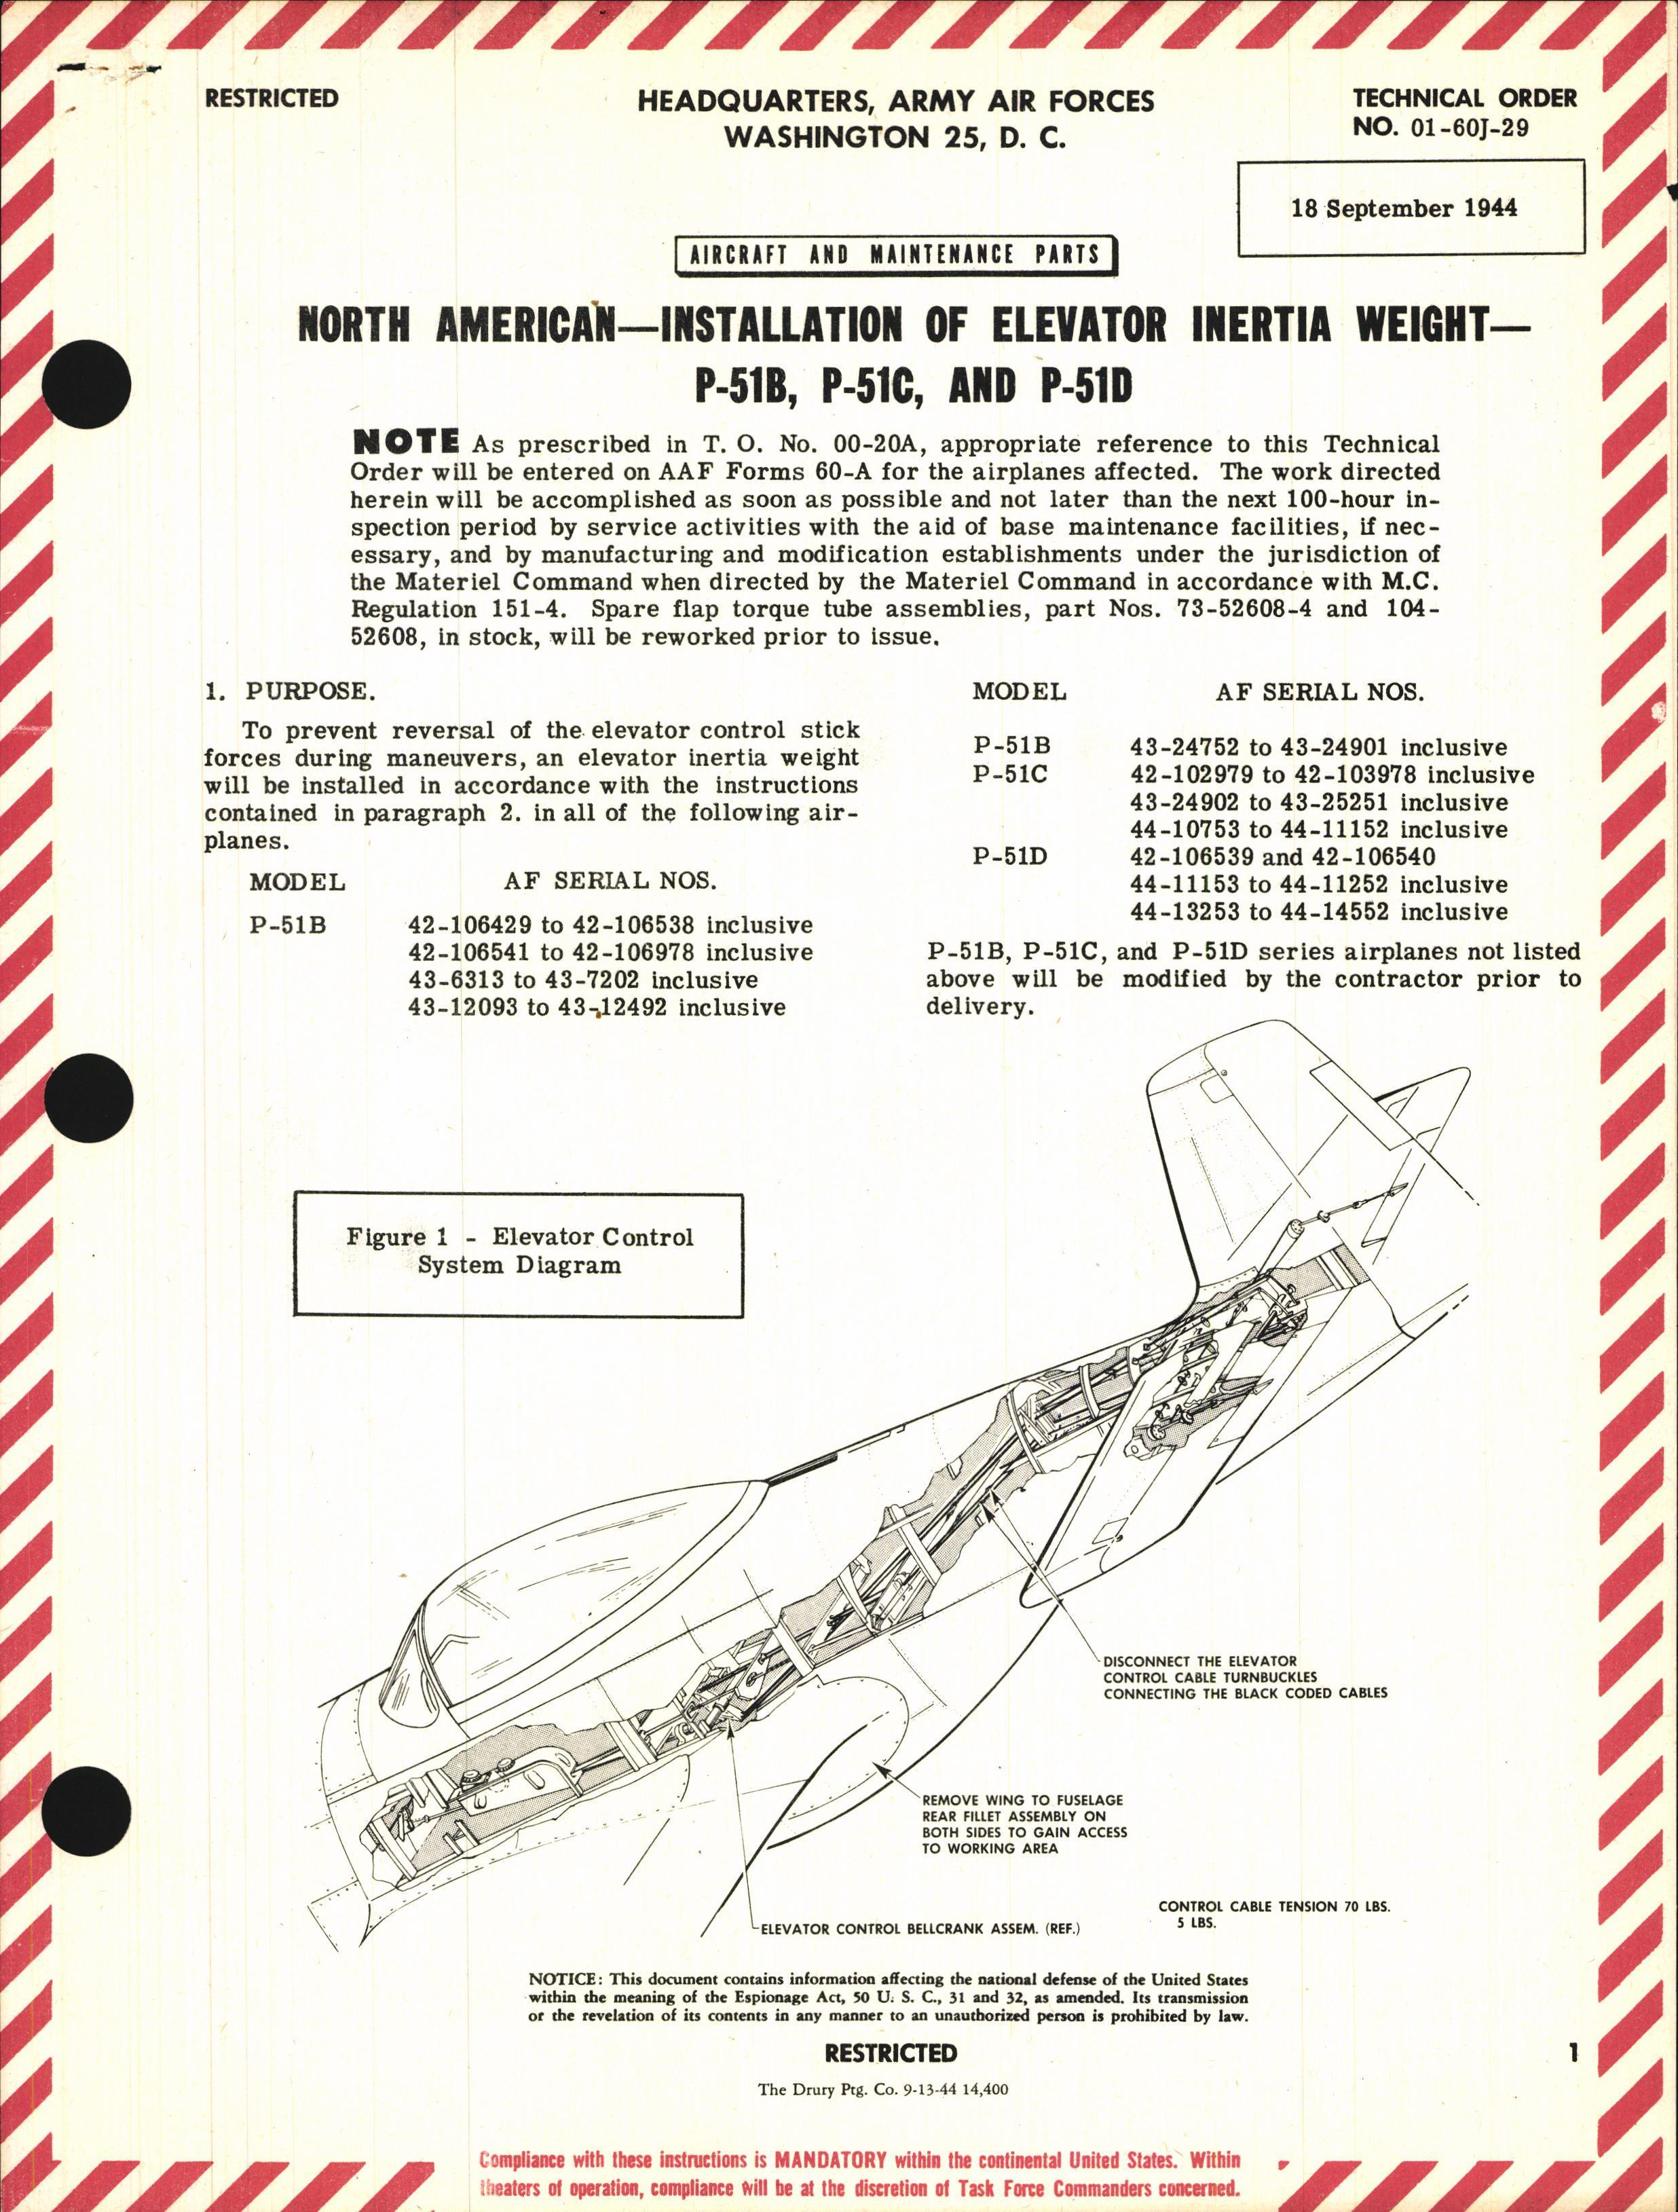 Sample page 1 from AirCorps Library document: Installation of Elevator Inertia Weight for P-51B, C, and D